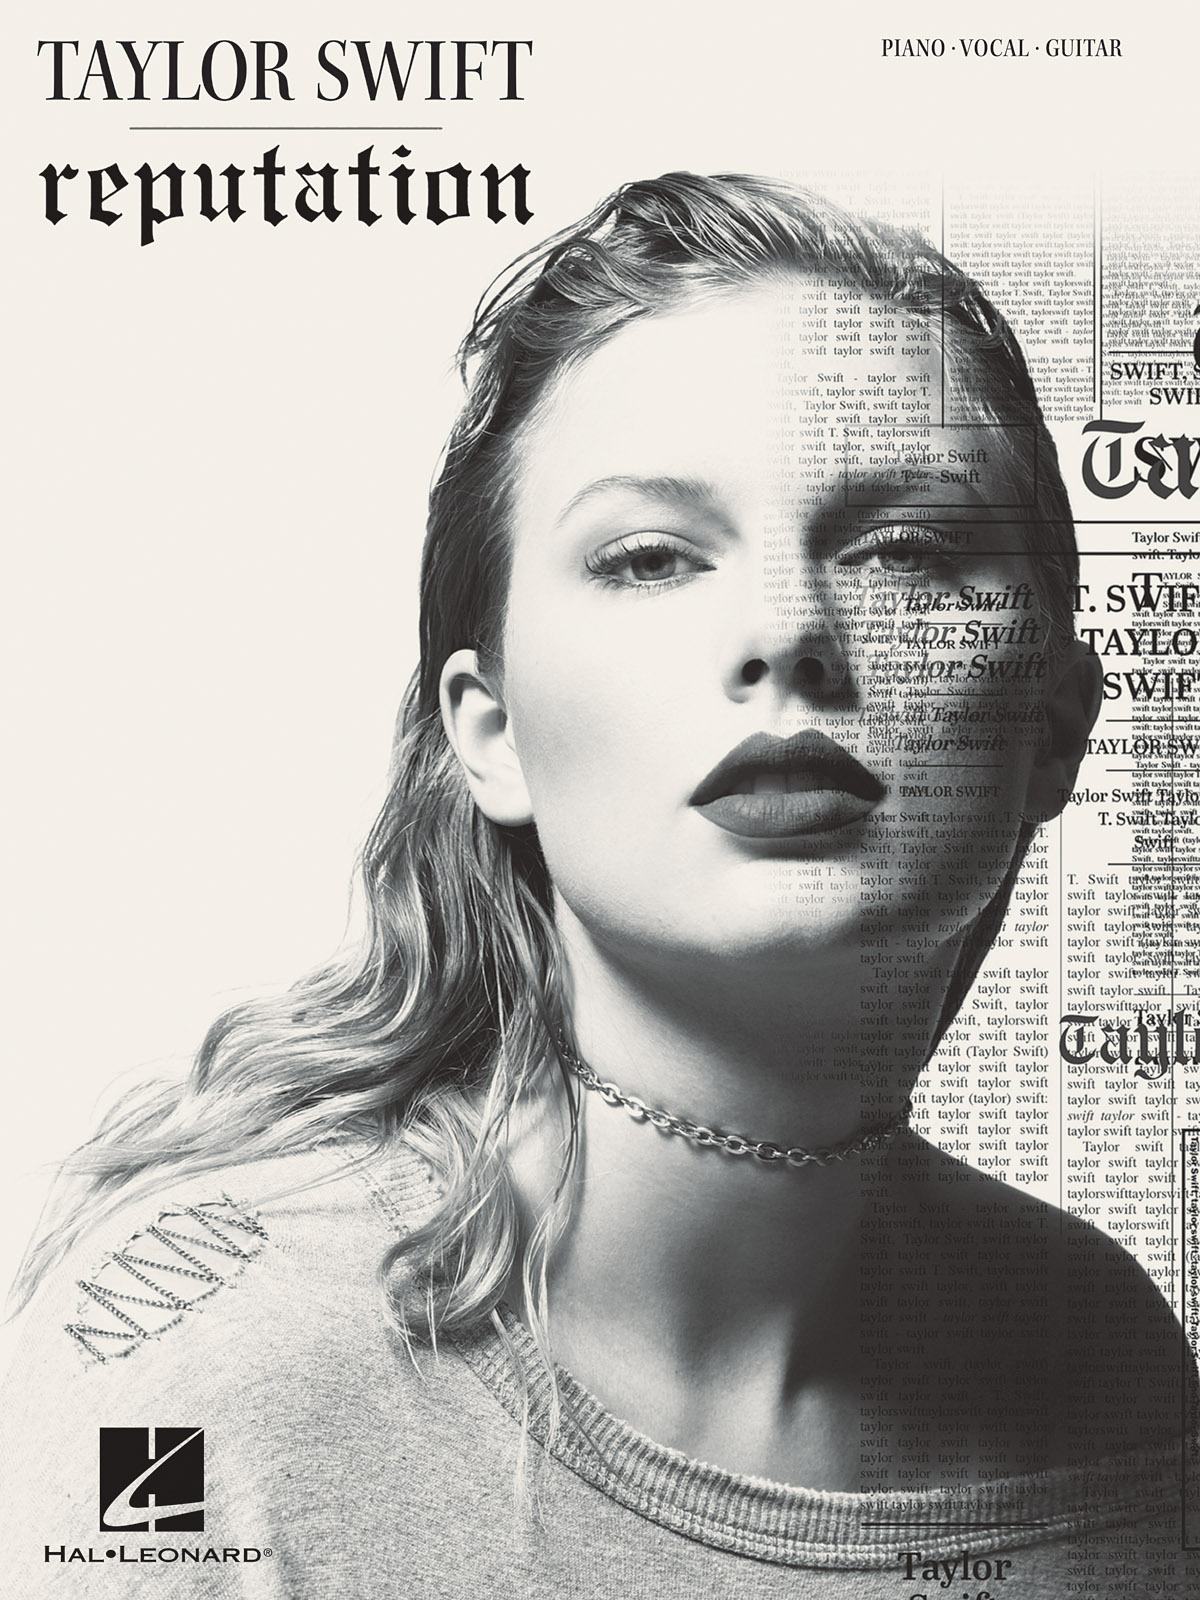 Taylor Swift - Reputation: Piano  Vocal and Guitar: Artist Songbook